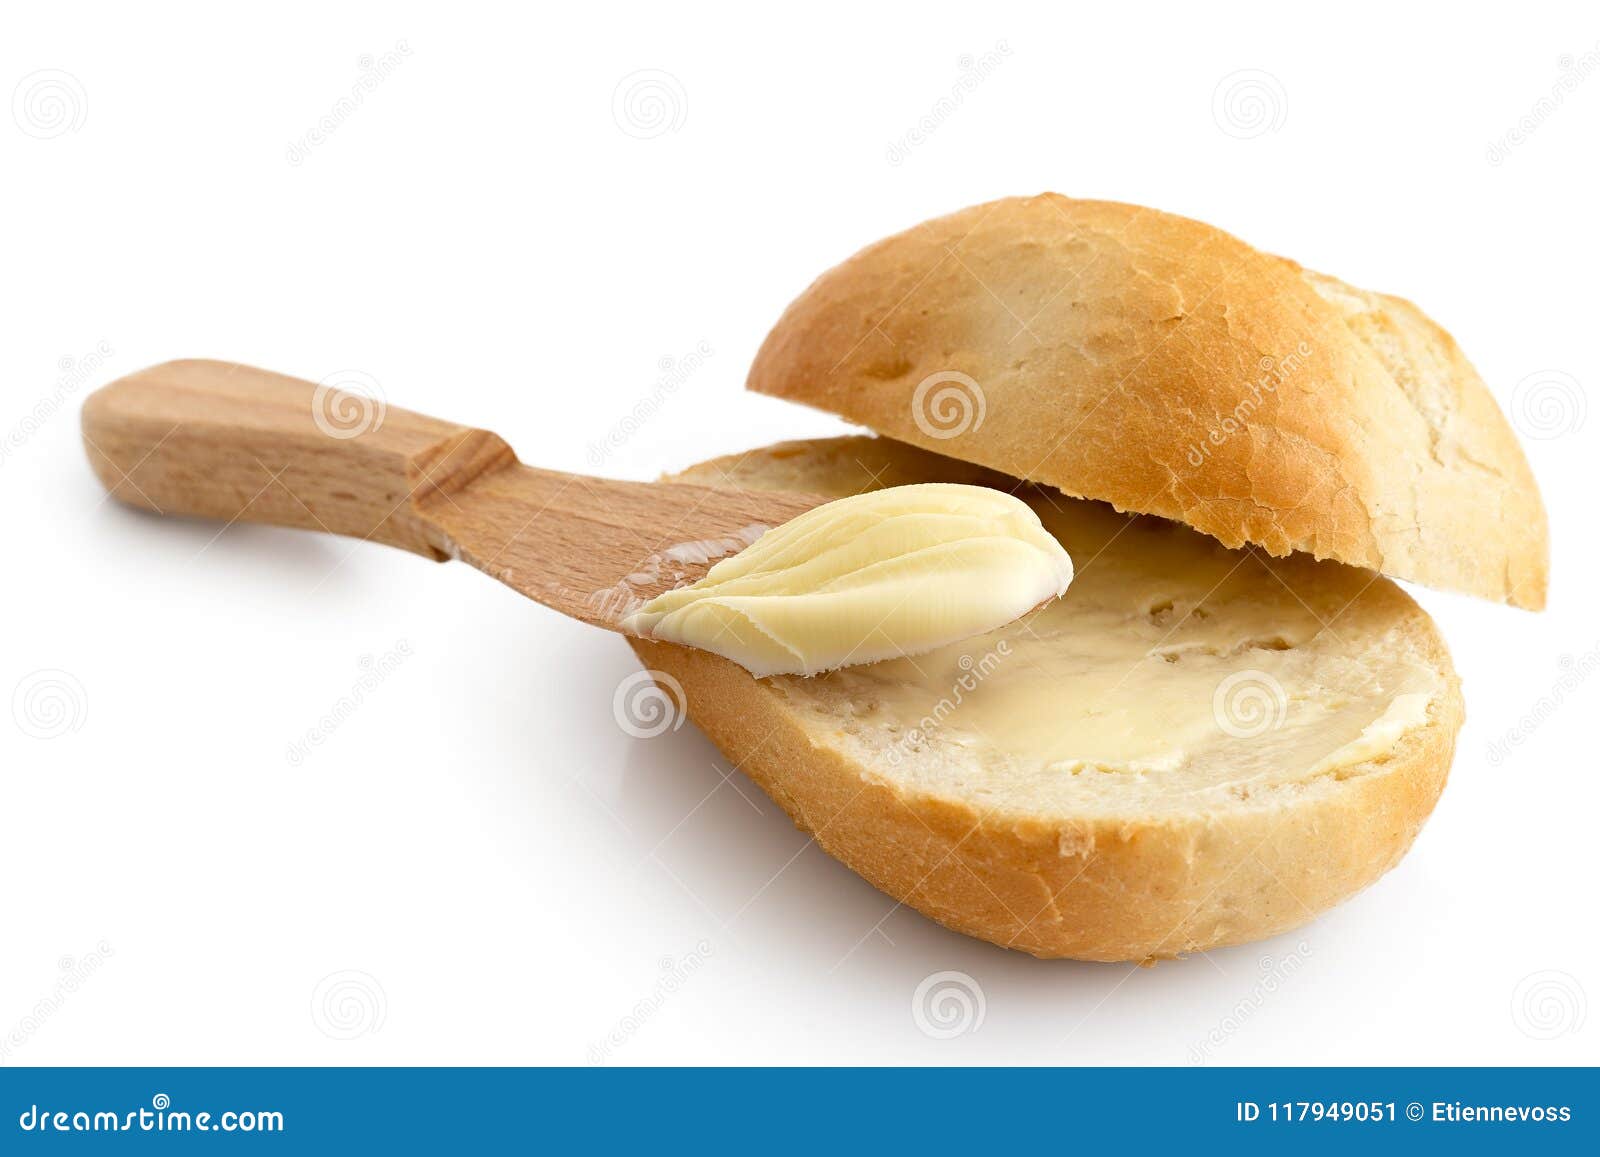 butter spread on a cut crusty bread roll with a wooden knife iso